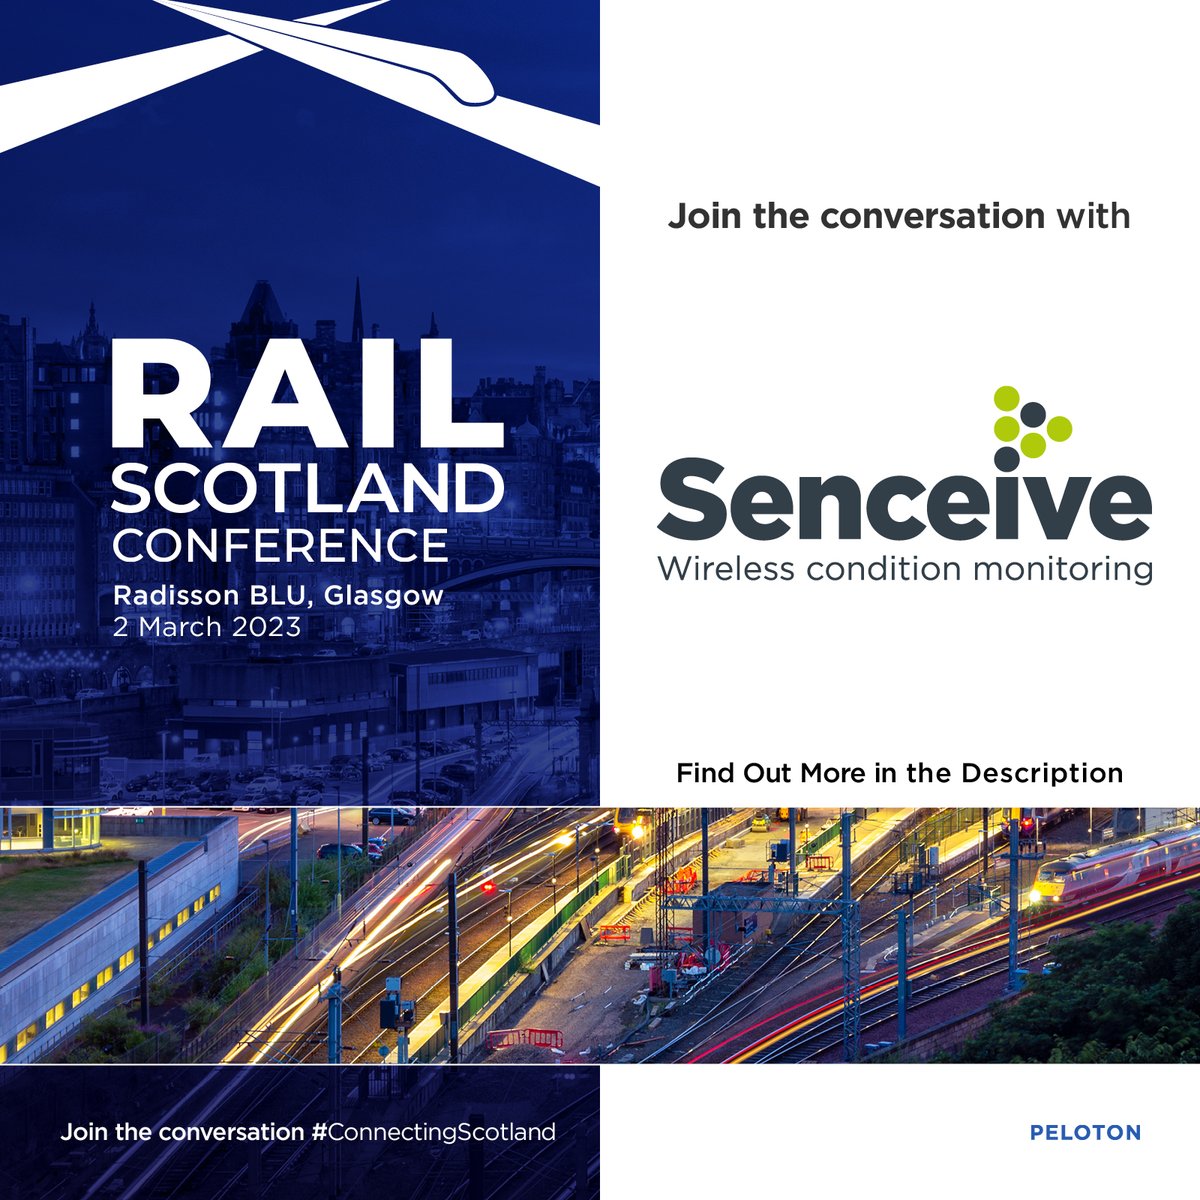 Visit us at Rail Scotland on 2 March & discover how our wireless technology is being used to remotely assess long term trends to optimise maintenance as well as detecting sudden events to protect people & assets. 

#ConnectingScotland #Rail #Railway #Transport #Scotland #Glasgow